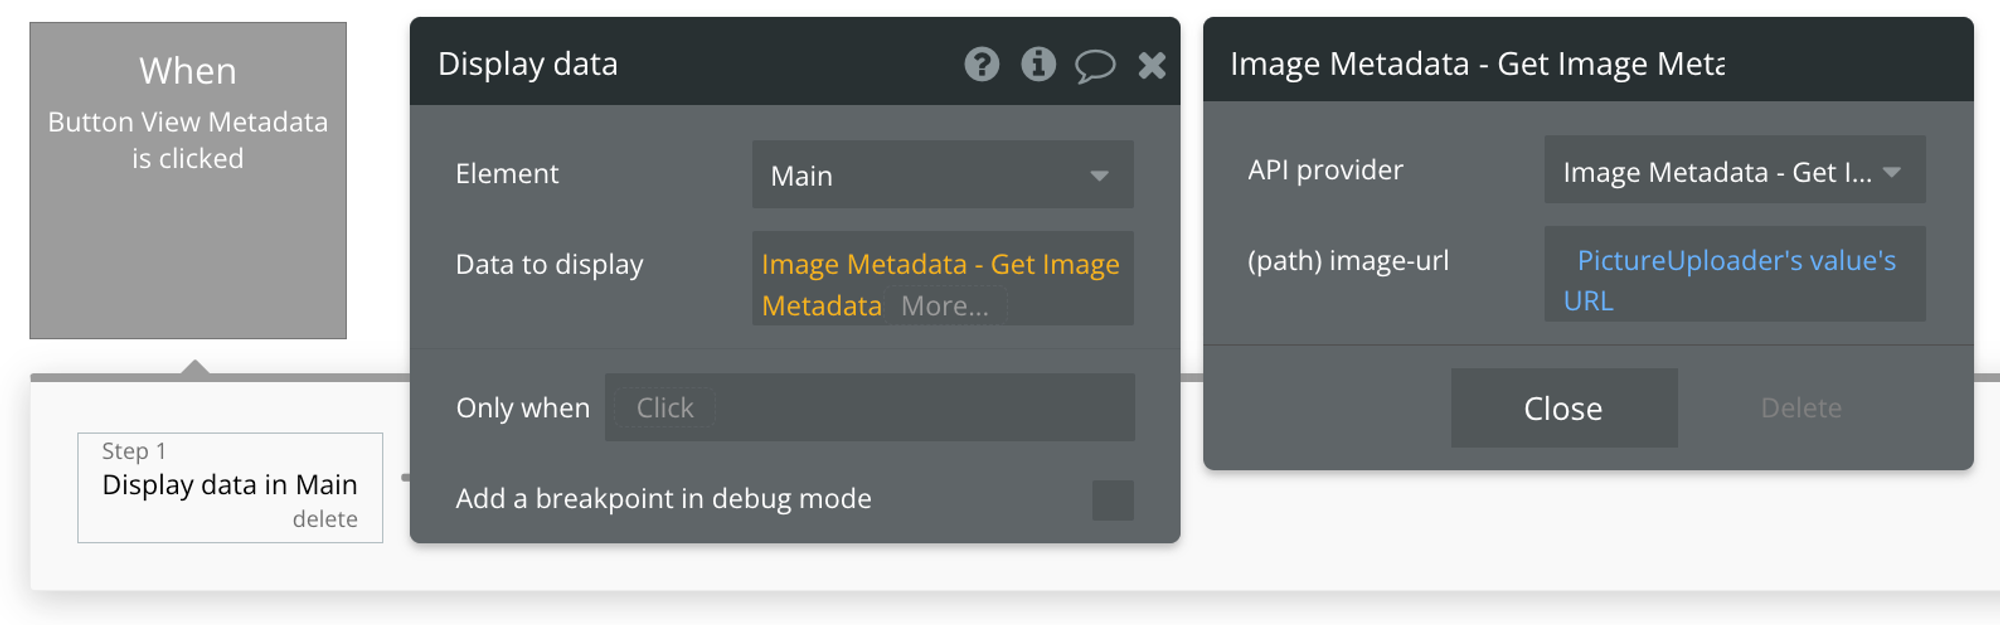 Select "Get Data from External API" for the Data to display, then find "Image Metadata - Get Image Metadata" from the list of API Providers